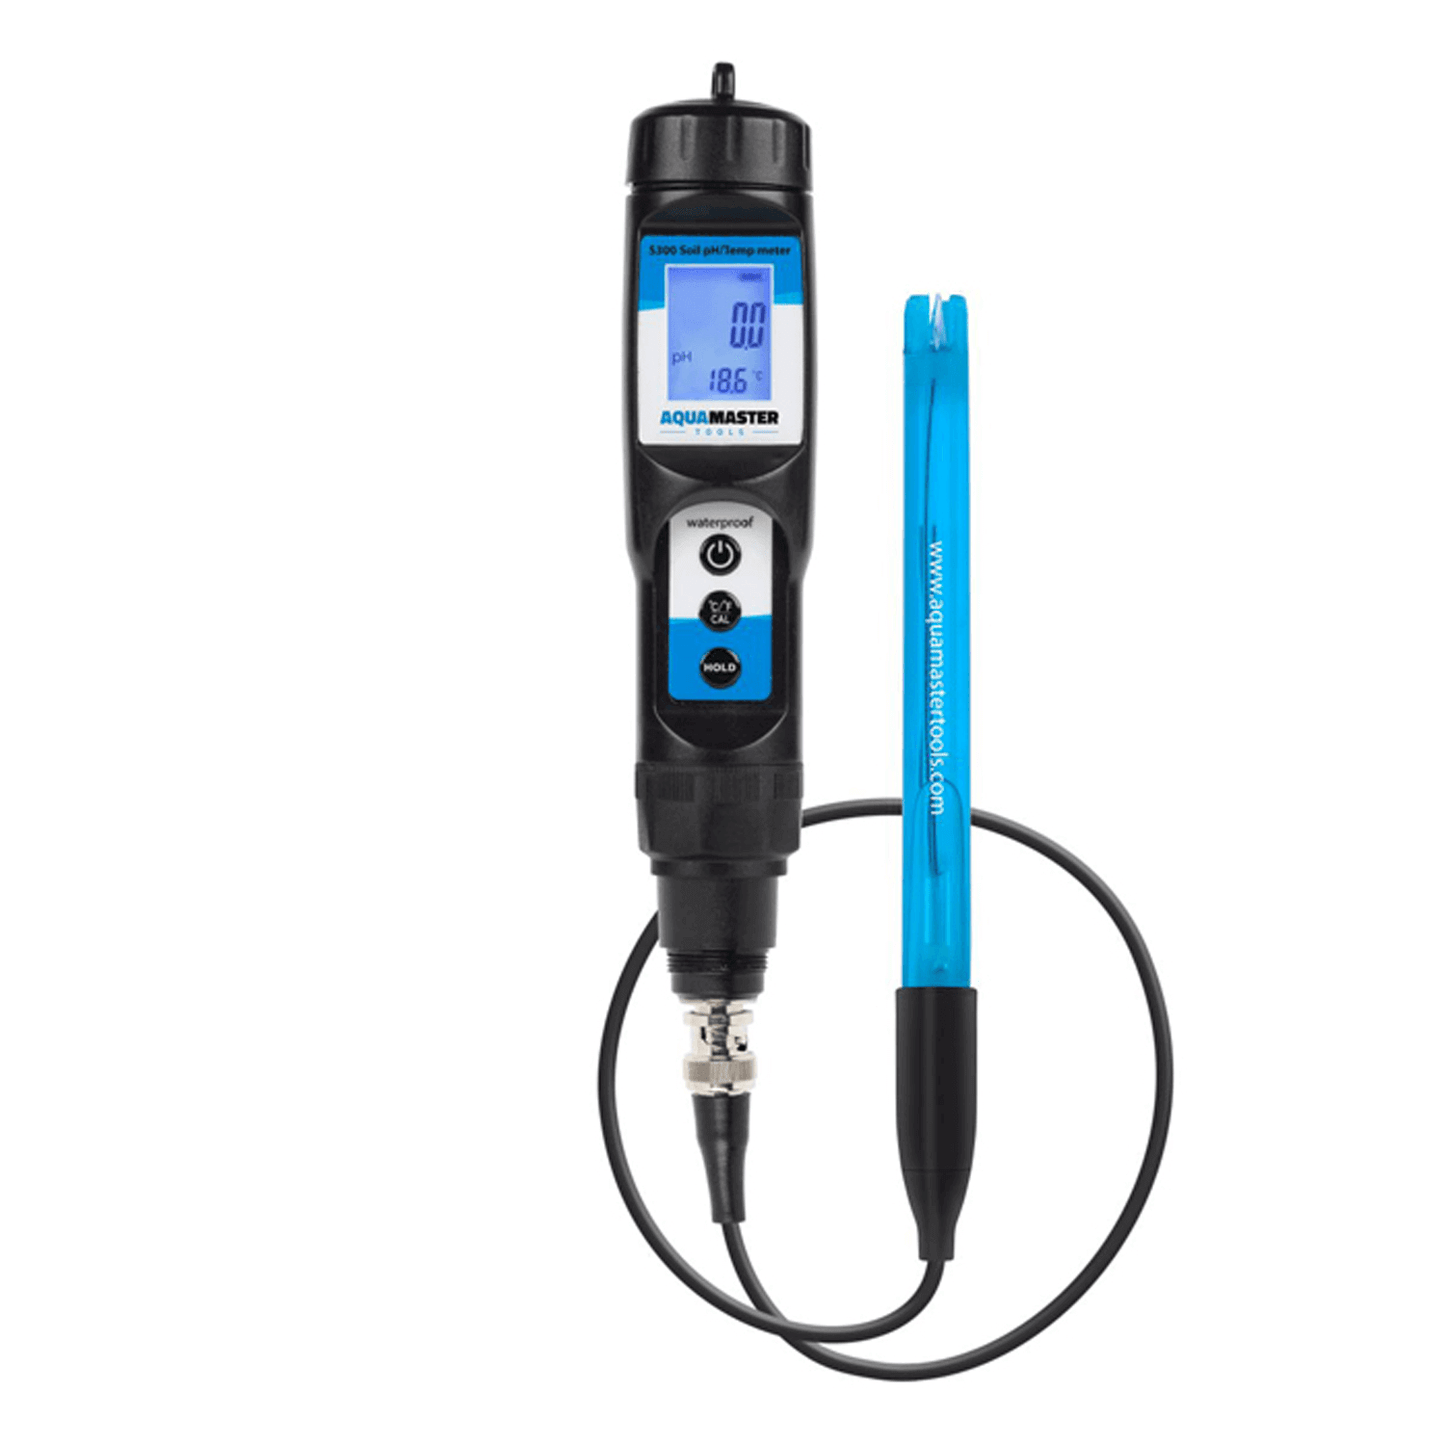 Aqua Master S300 Pro 2 Substrate pH and Temperature Meter AMT1030 Planting & Watering